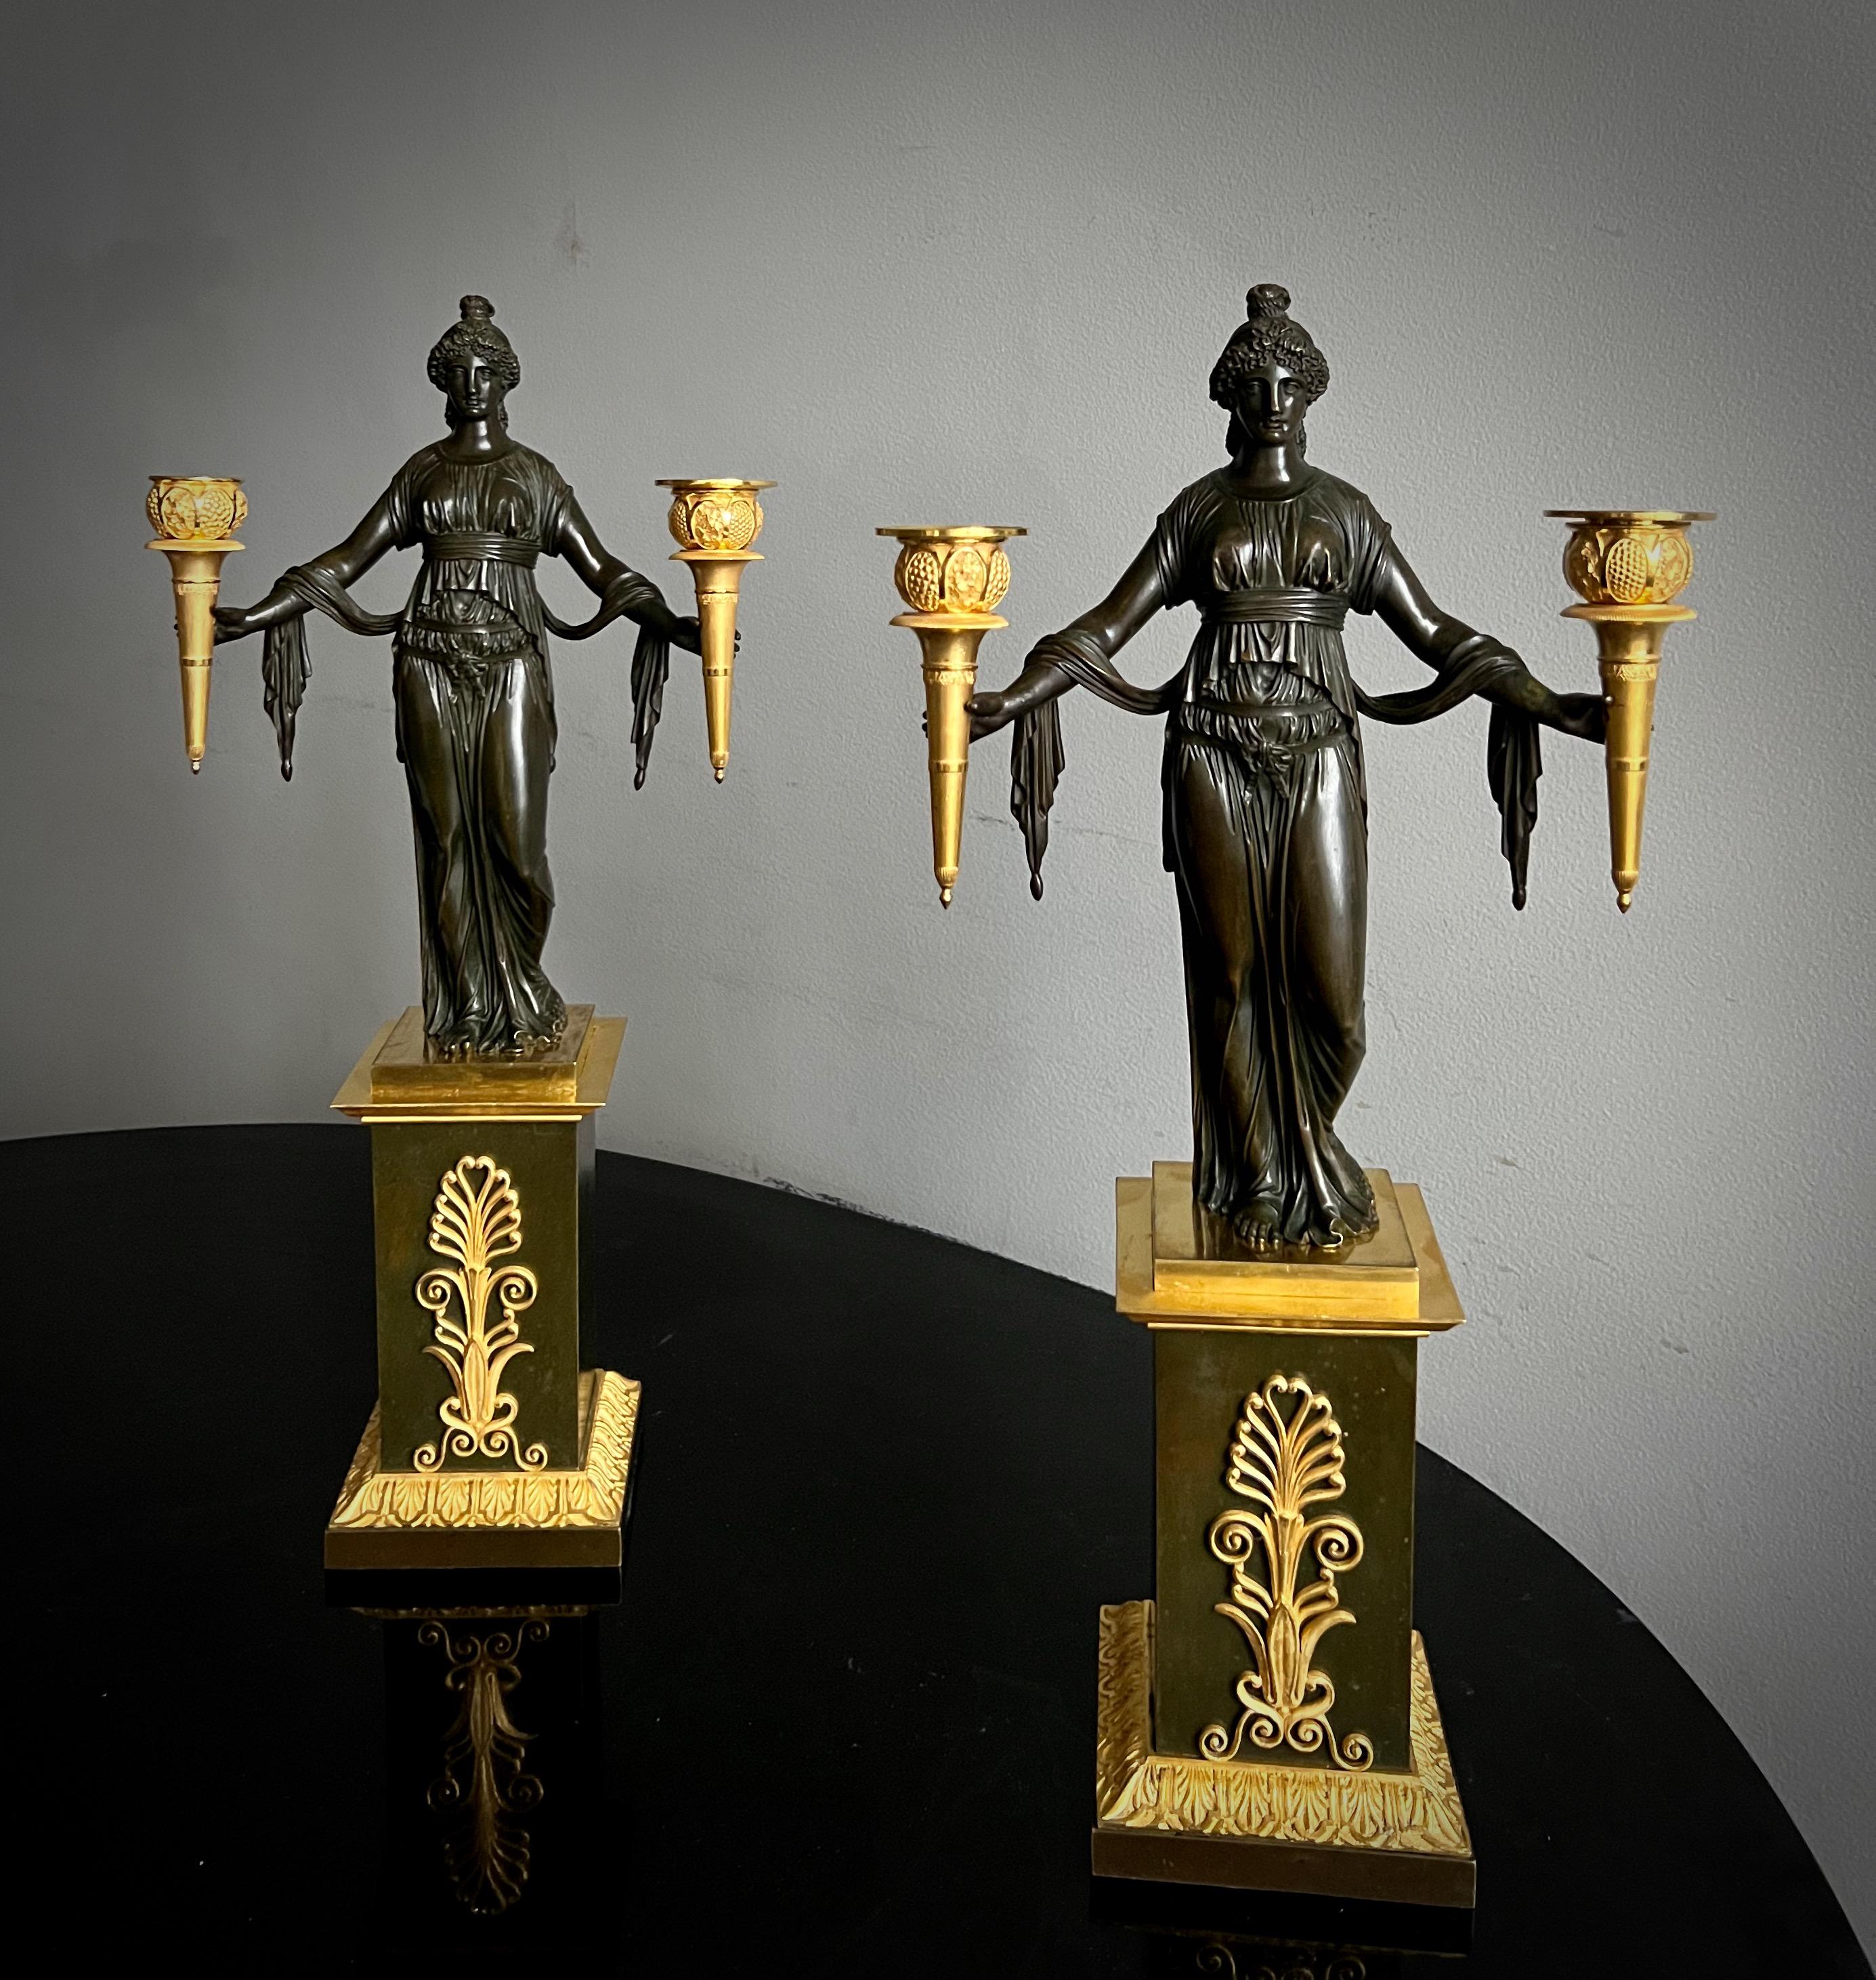 A very elegant and fine pair of gilt and patinated empire candelabra of superb quality. Possibly made in England and from the Vulliamy workshops. Under the base possibly dated 1811. Gilding is in very good condition and the chasing of the bronze is